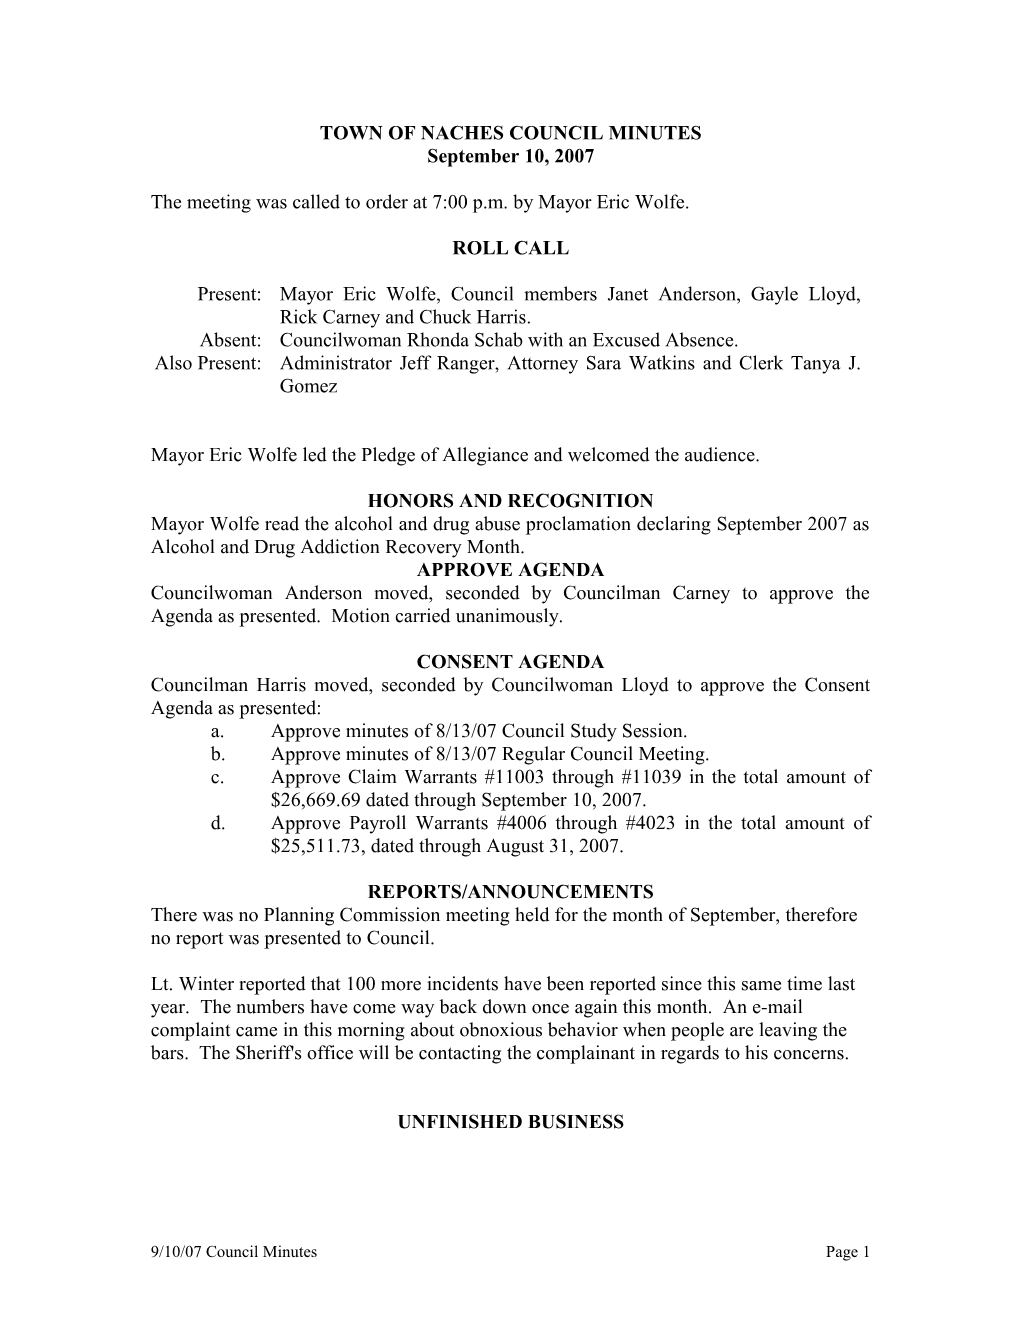 Town of Naches Council Minutes